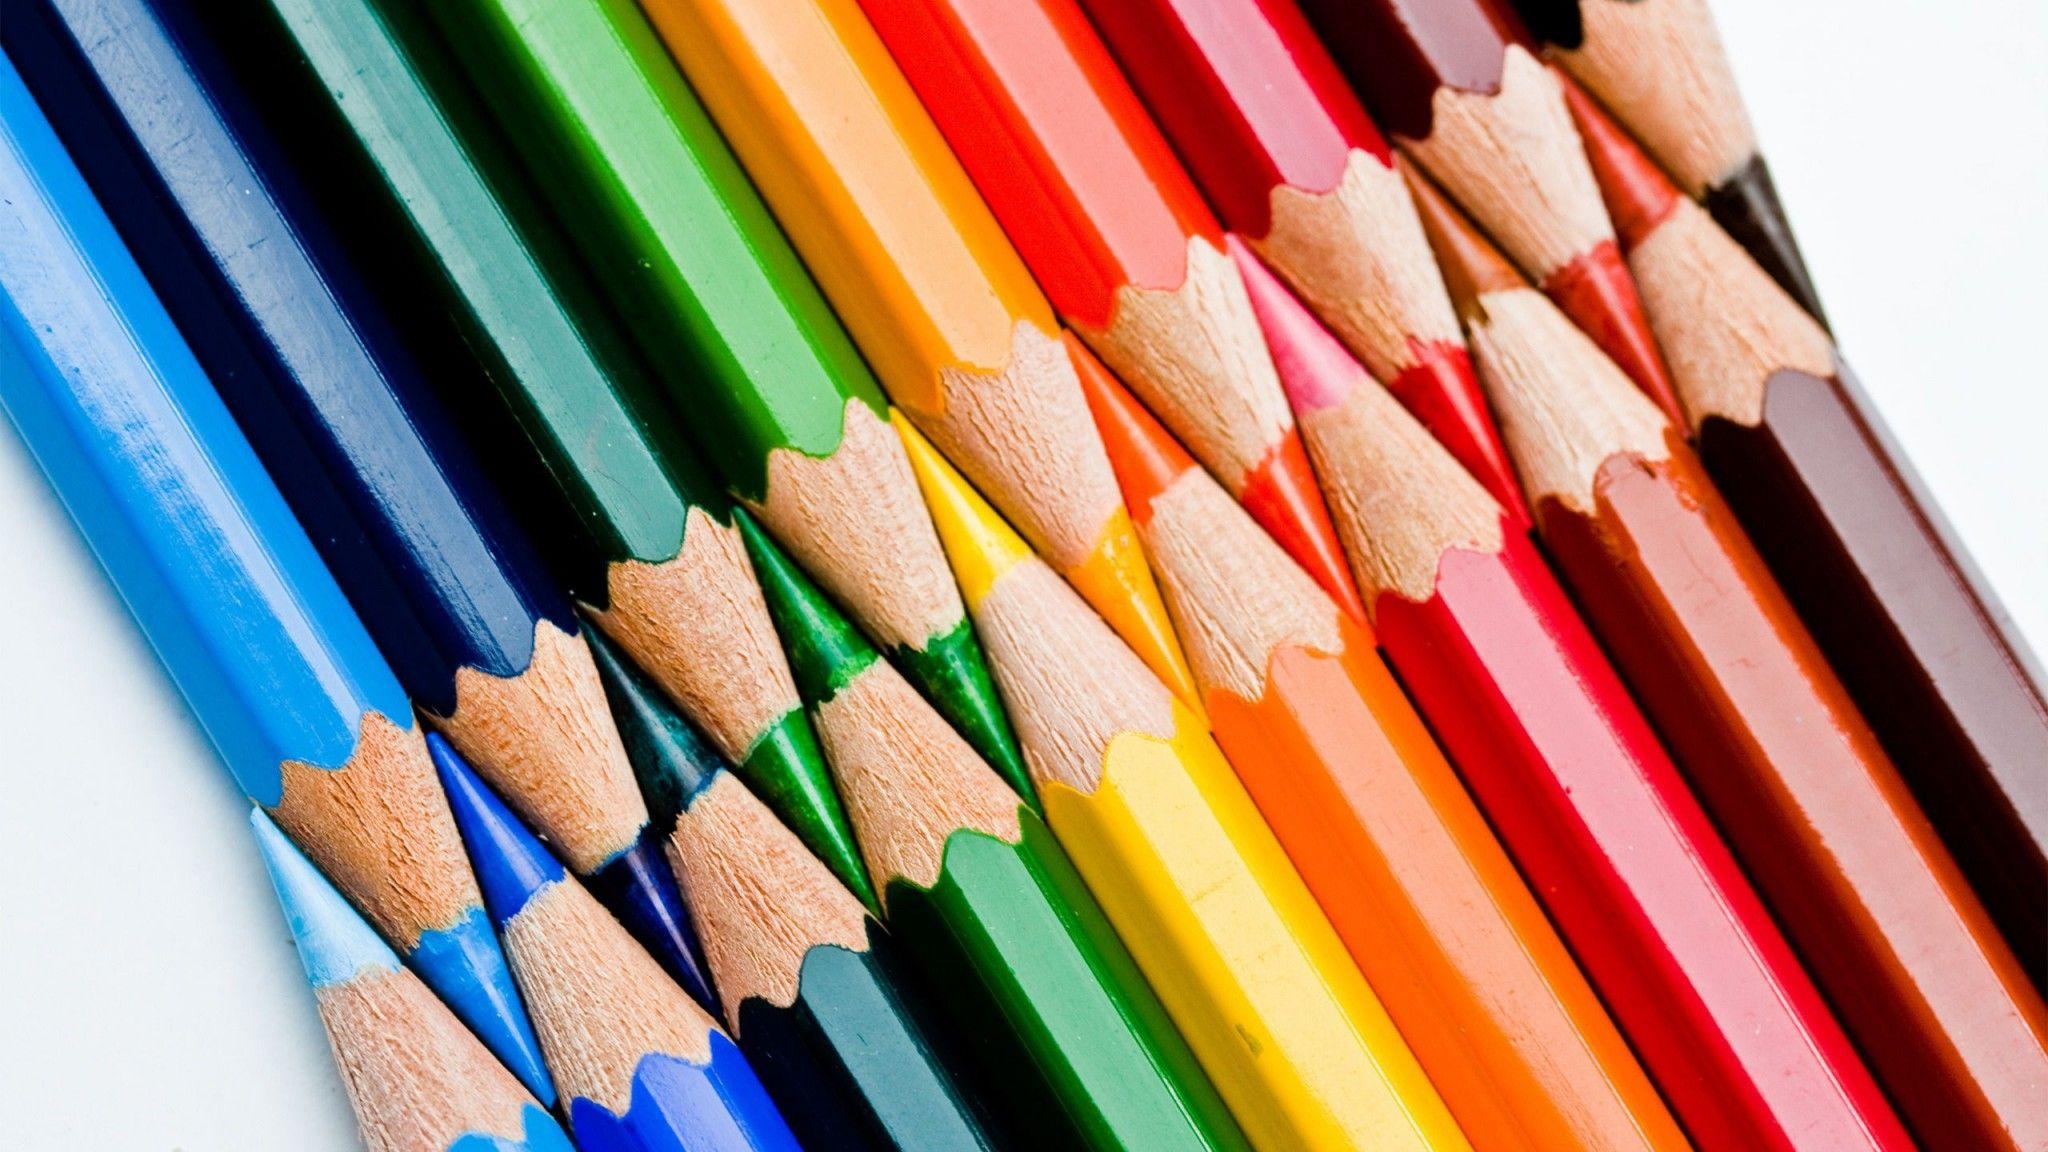 Gallery For: Free Crayon Wallpaper, HQ Free Crayon Background